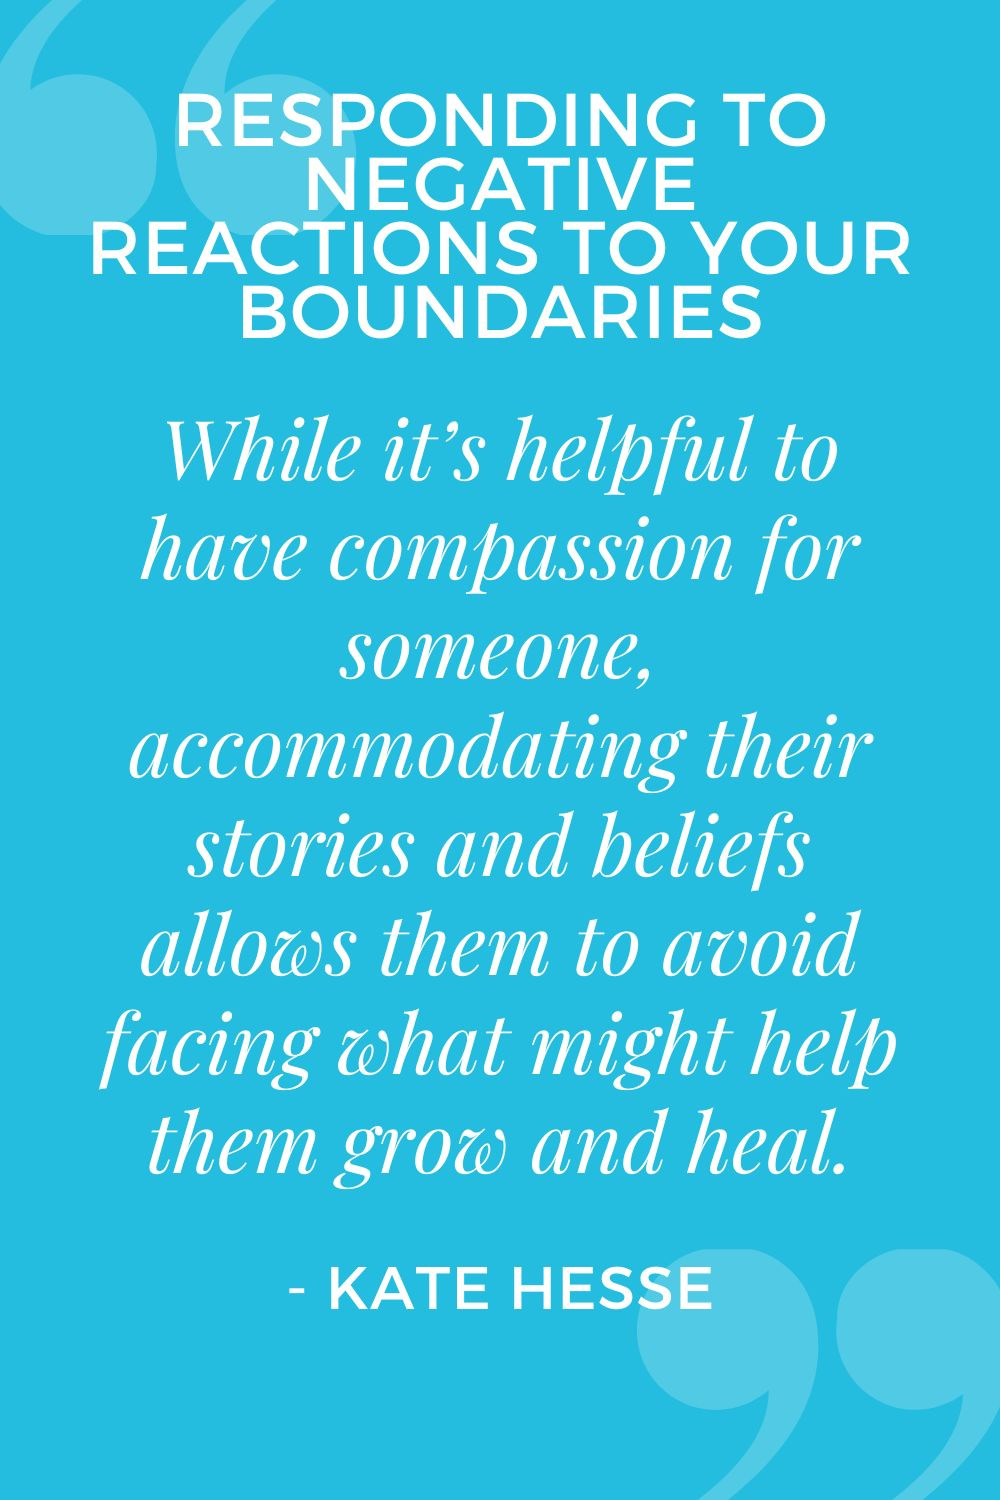 While it's helpful to have compassion for someone, accommodating their stories and beliefs allows them to avoid facing what might help them grow and heal.